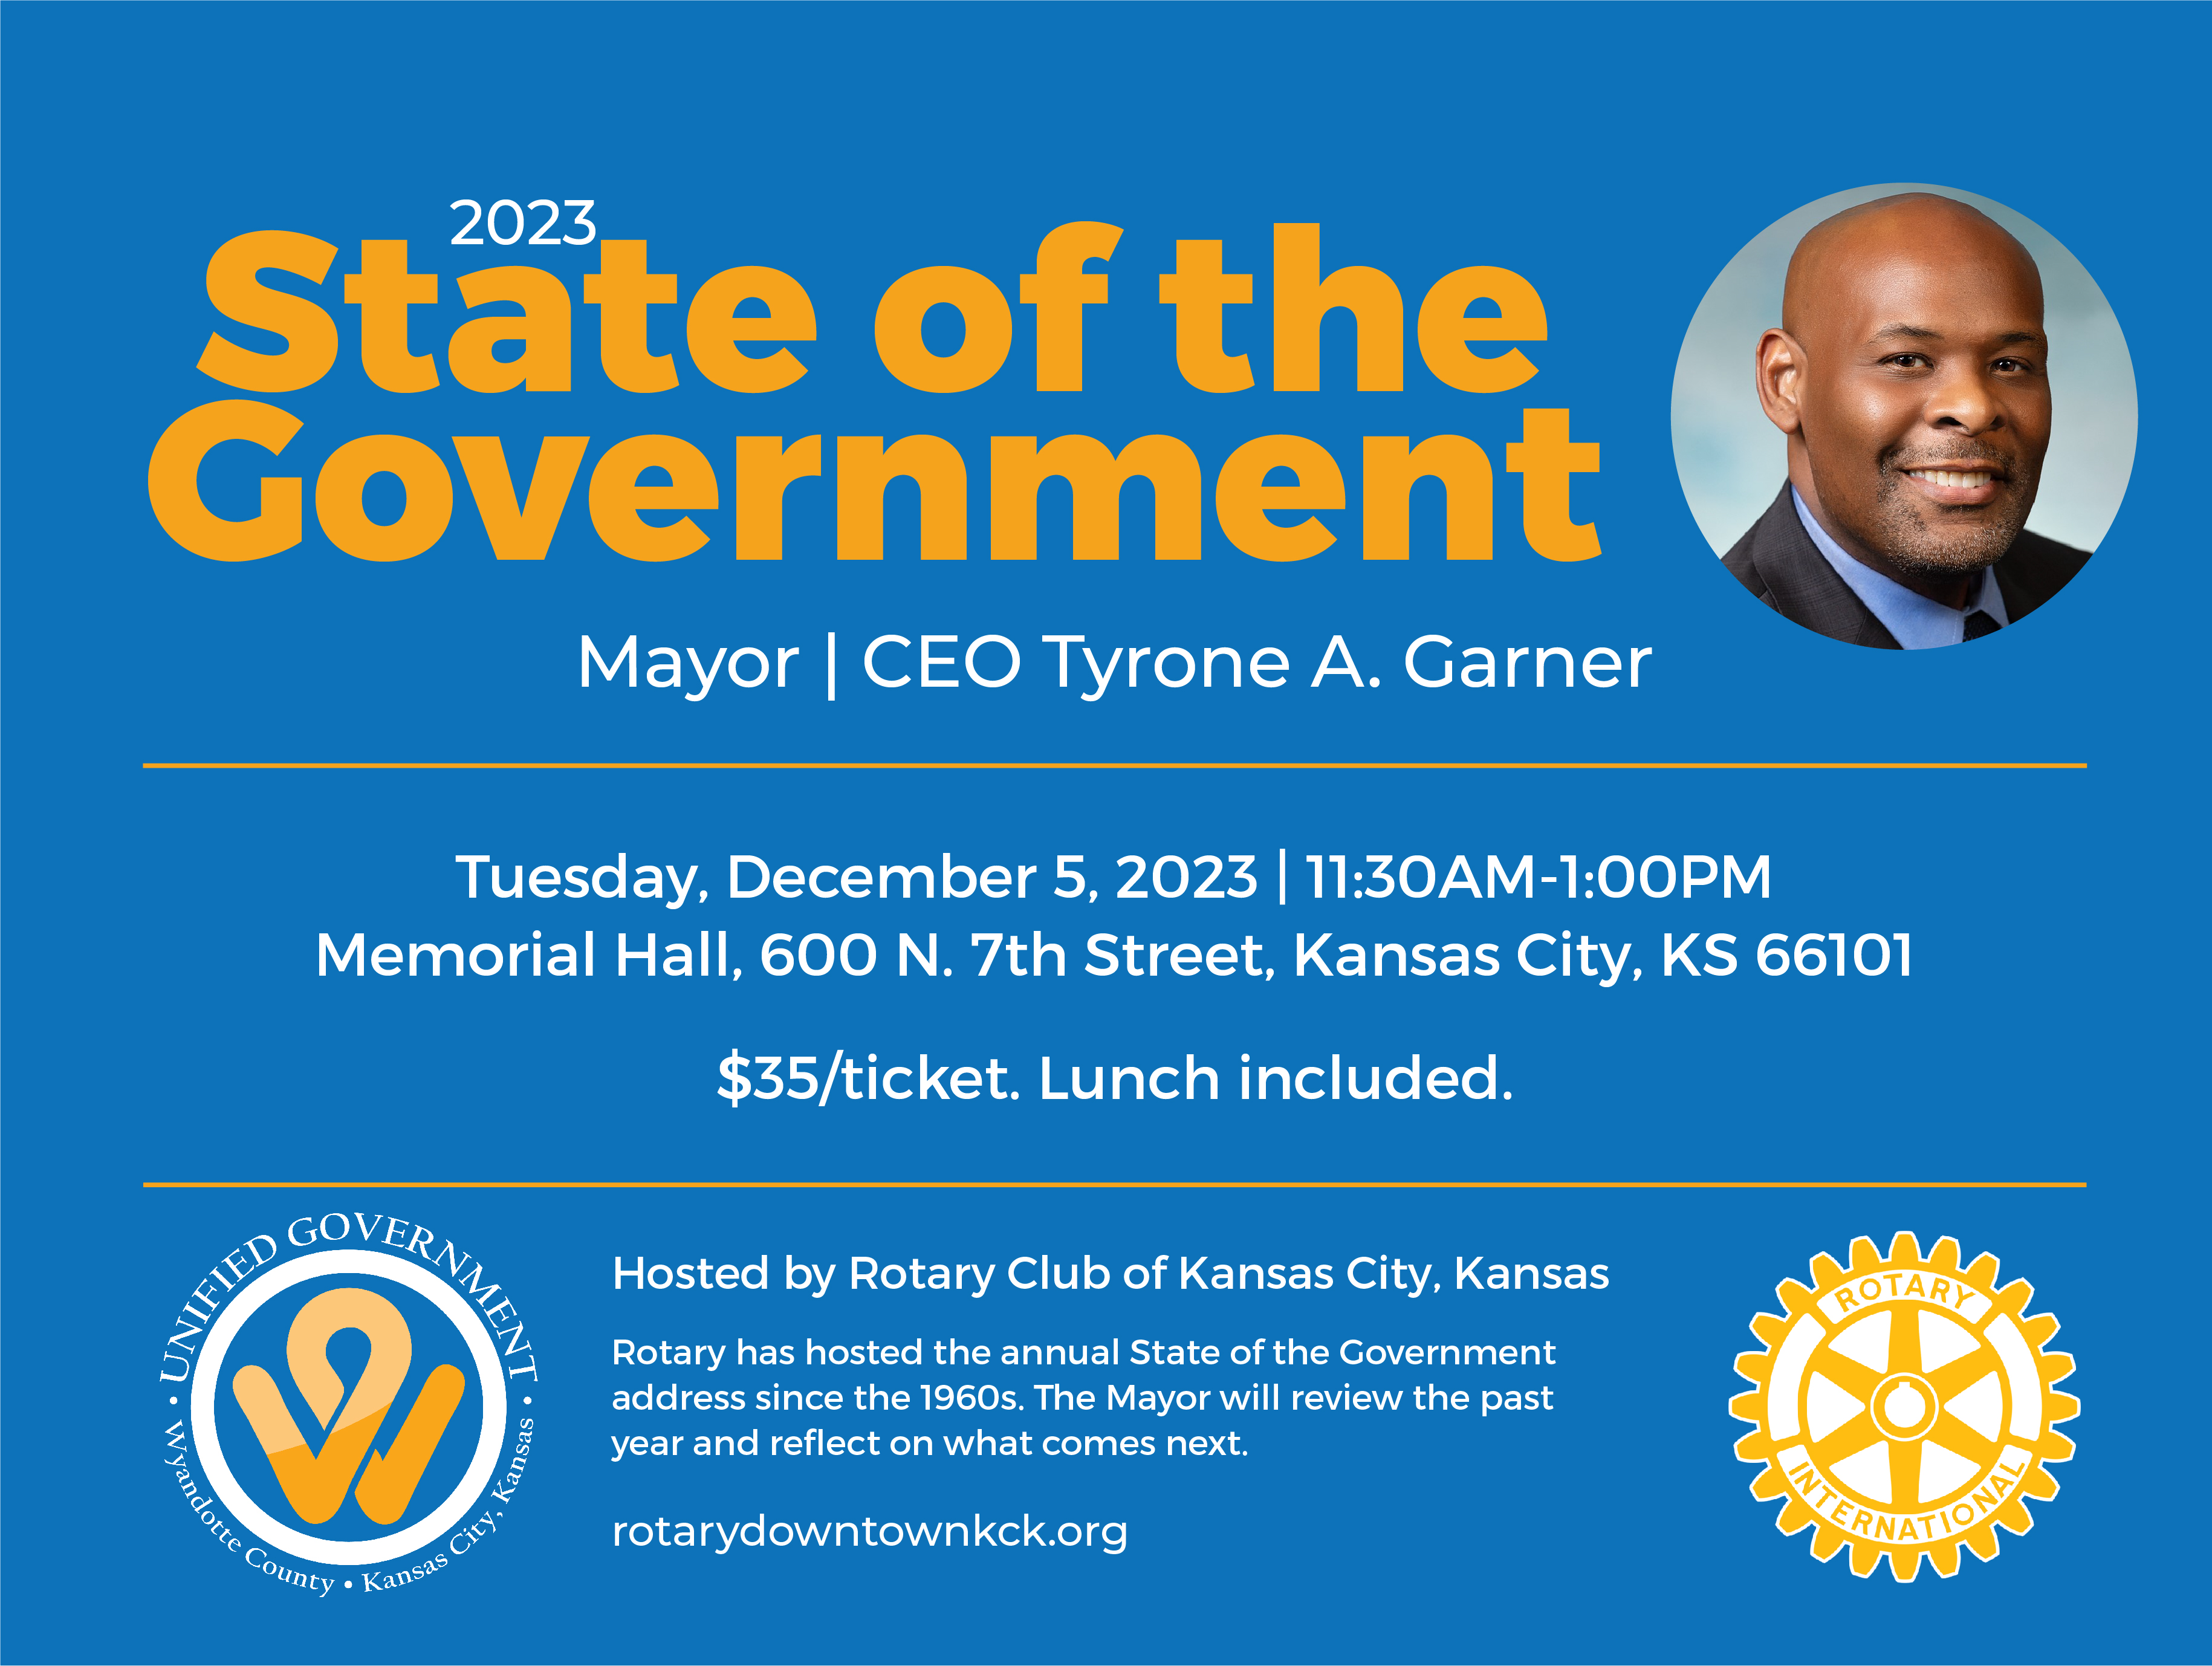 2023 State of the Government Invitation-05.jpg